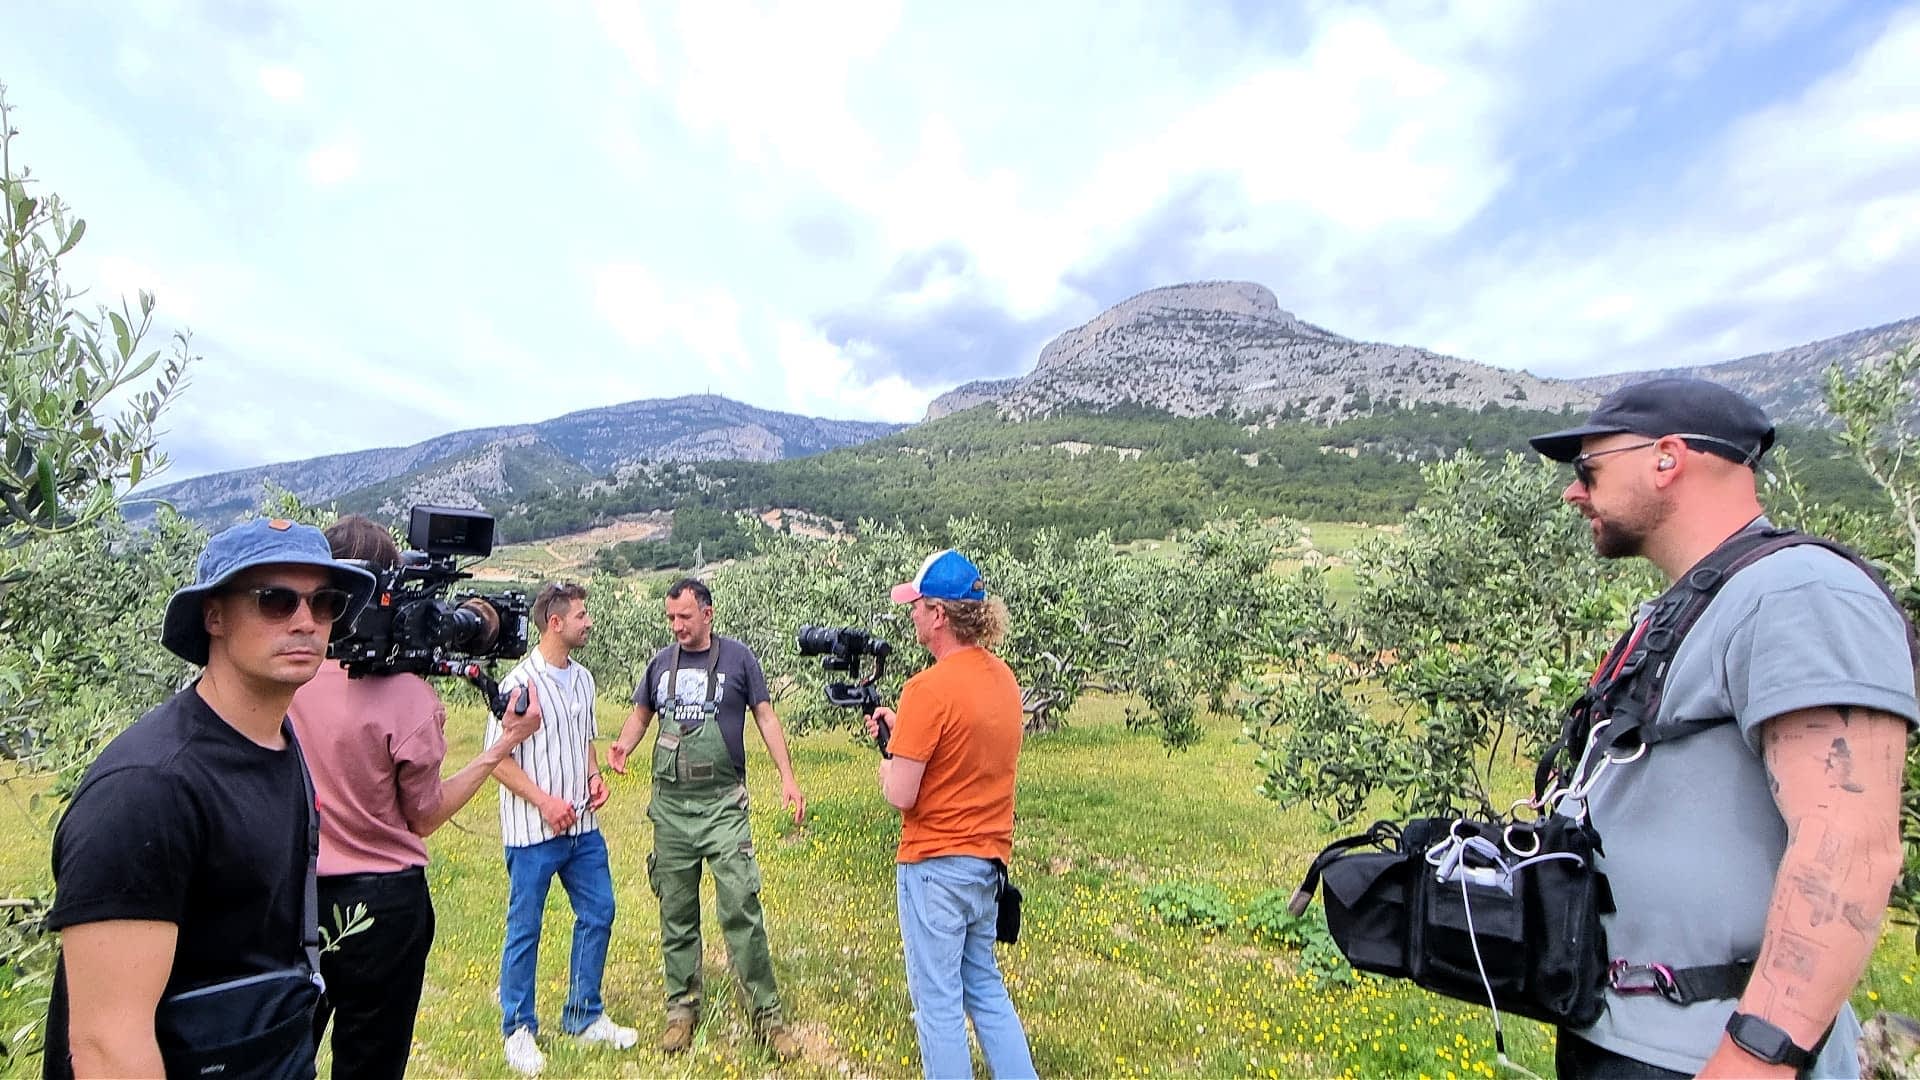 the-best-olive-oils-business-europe-popular-german-travel-program-features-awardwinning-producer-in-dalmatia-olive-oil-times